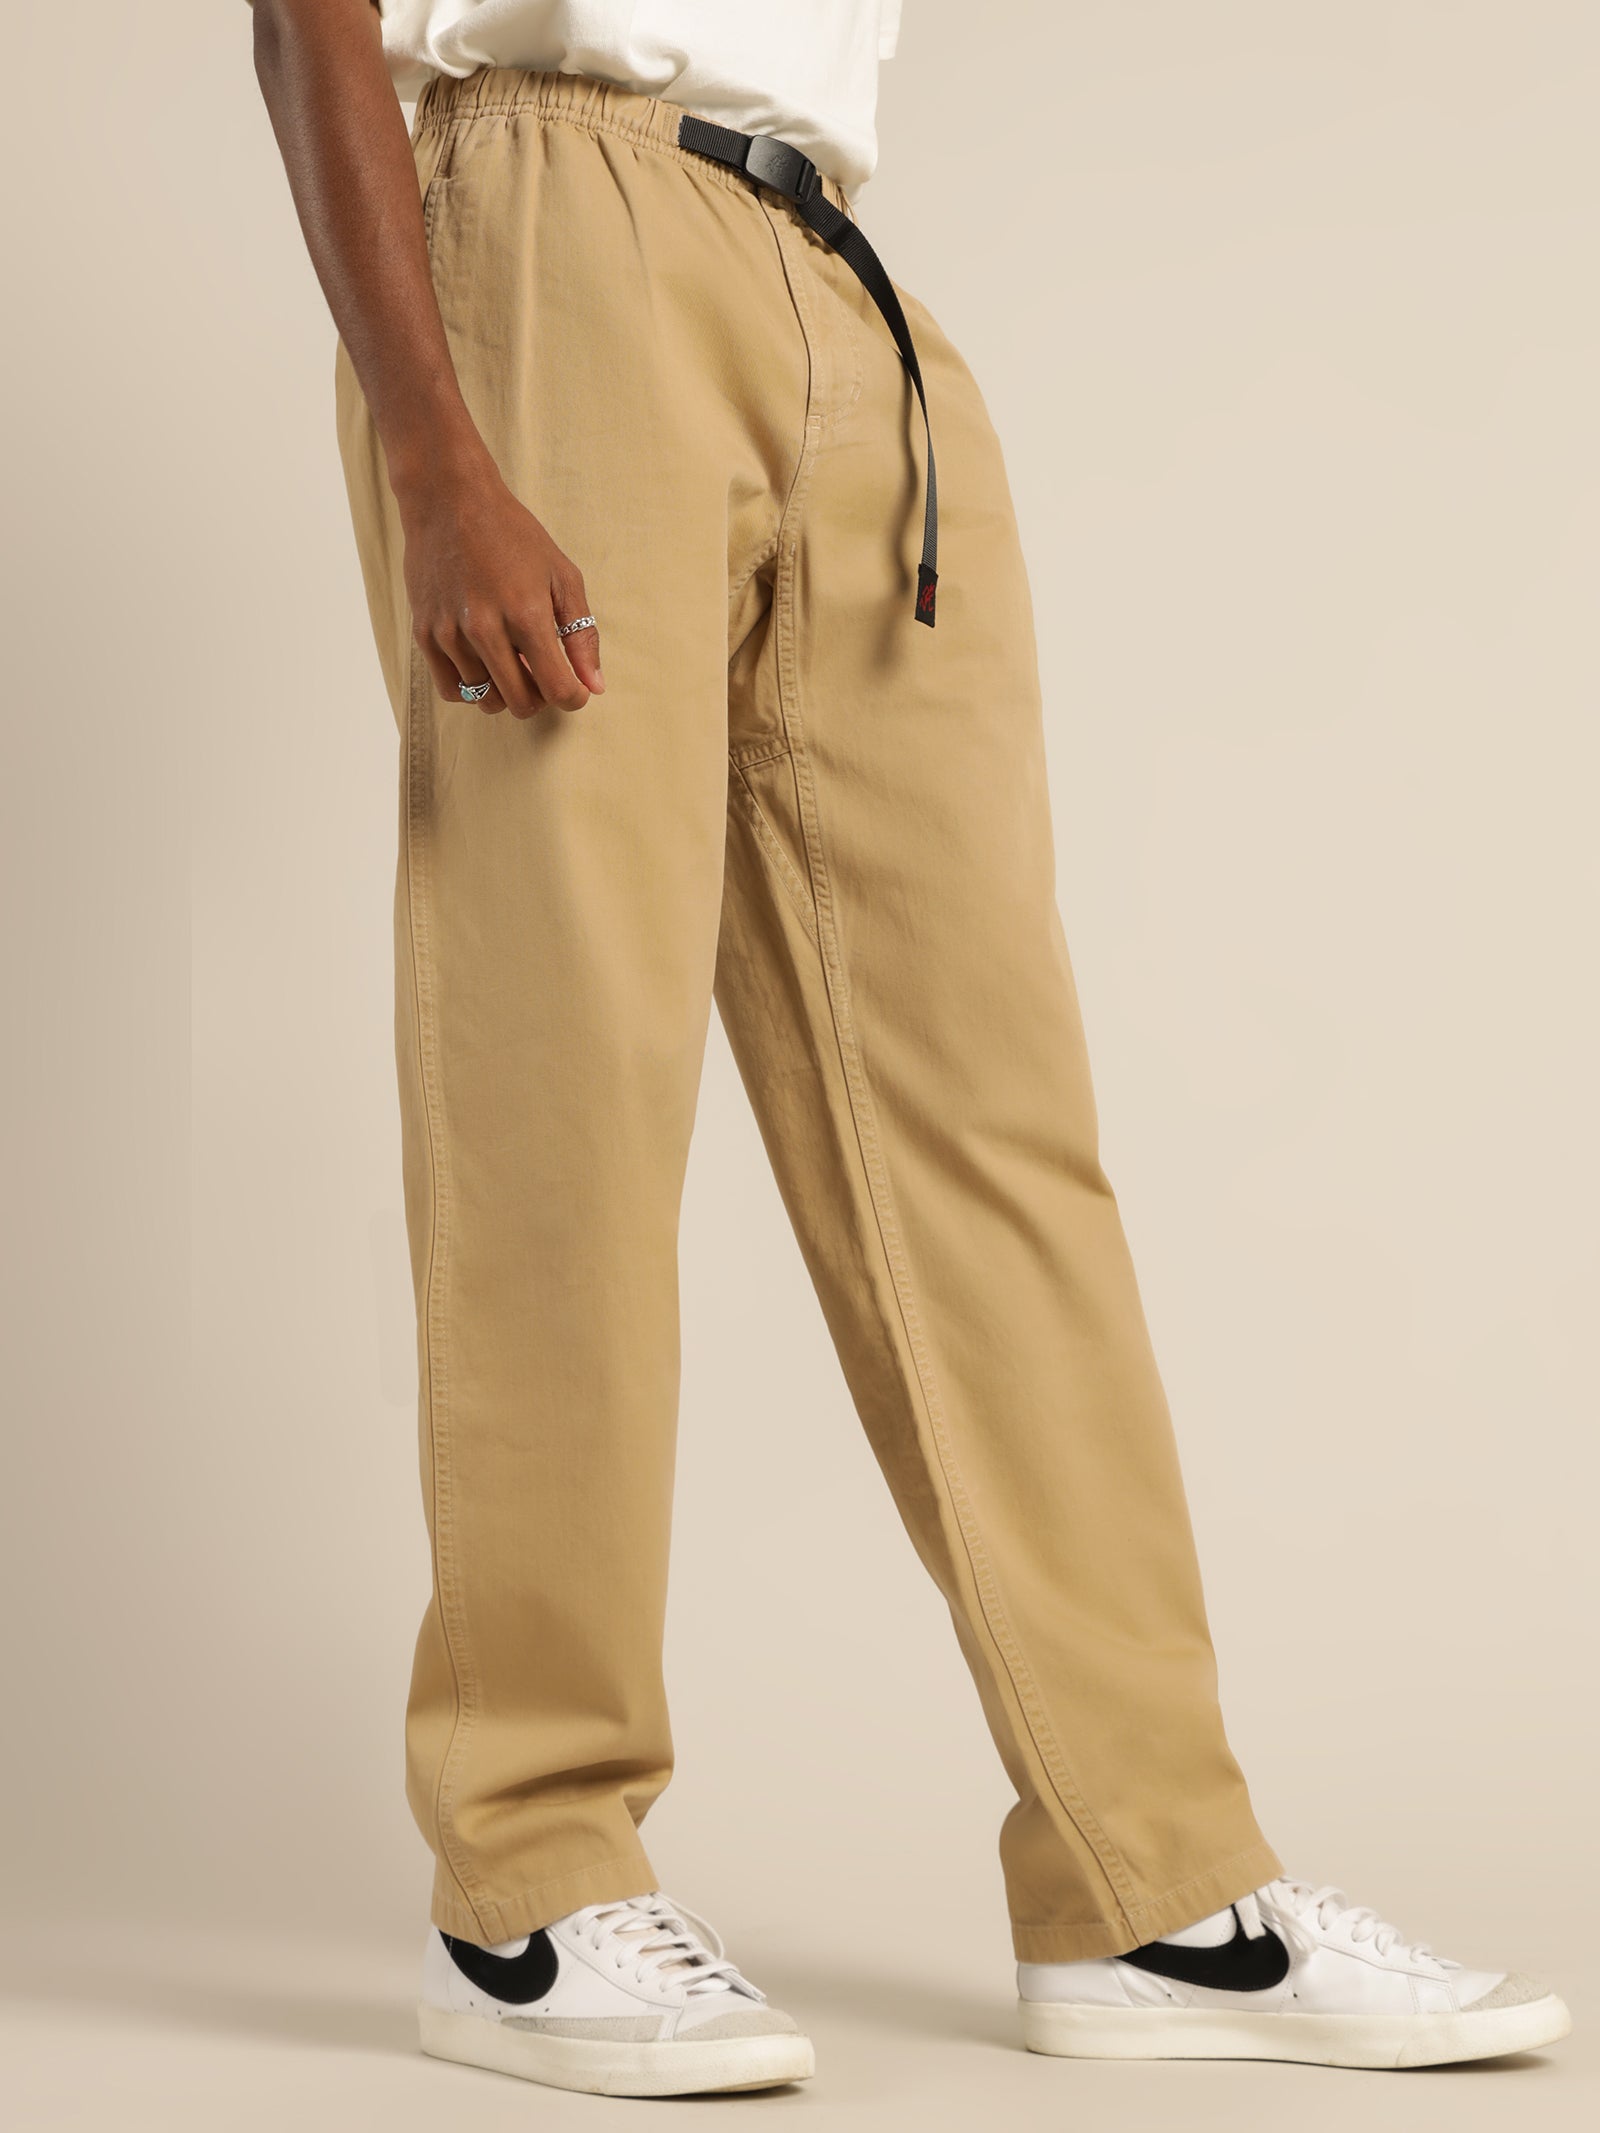 GRAMICCI Pants in jogger style made of teddy in dark gray